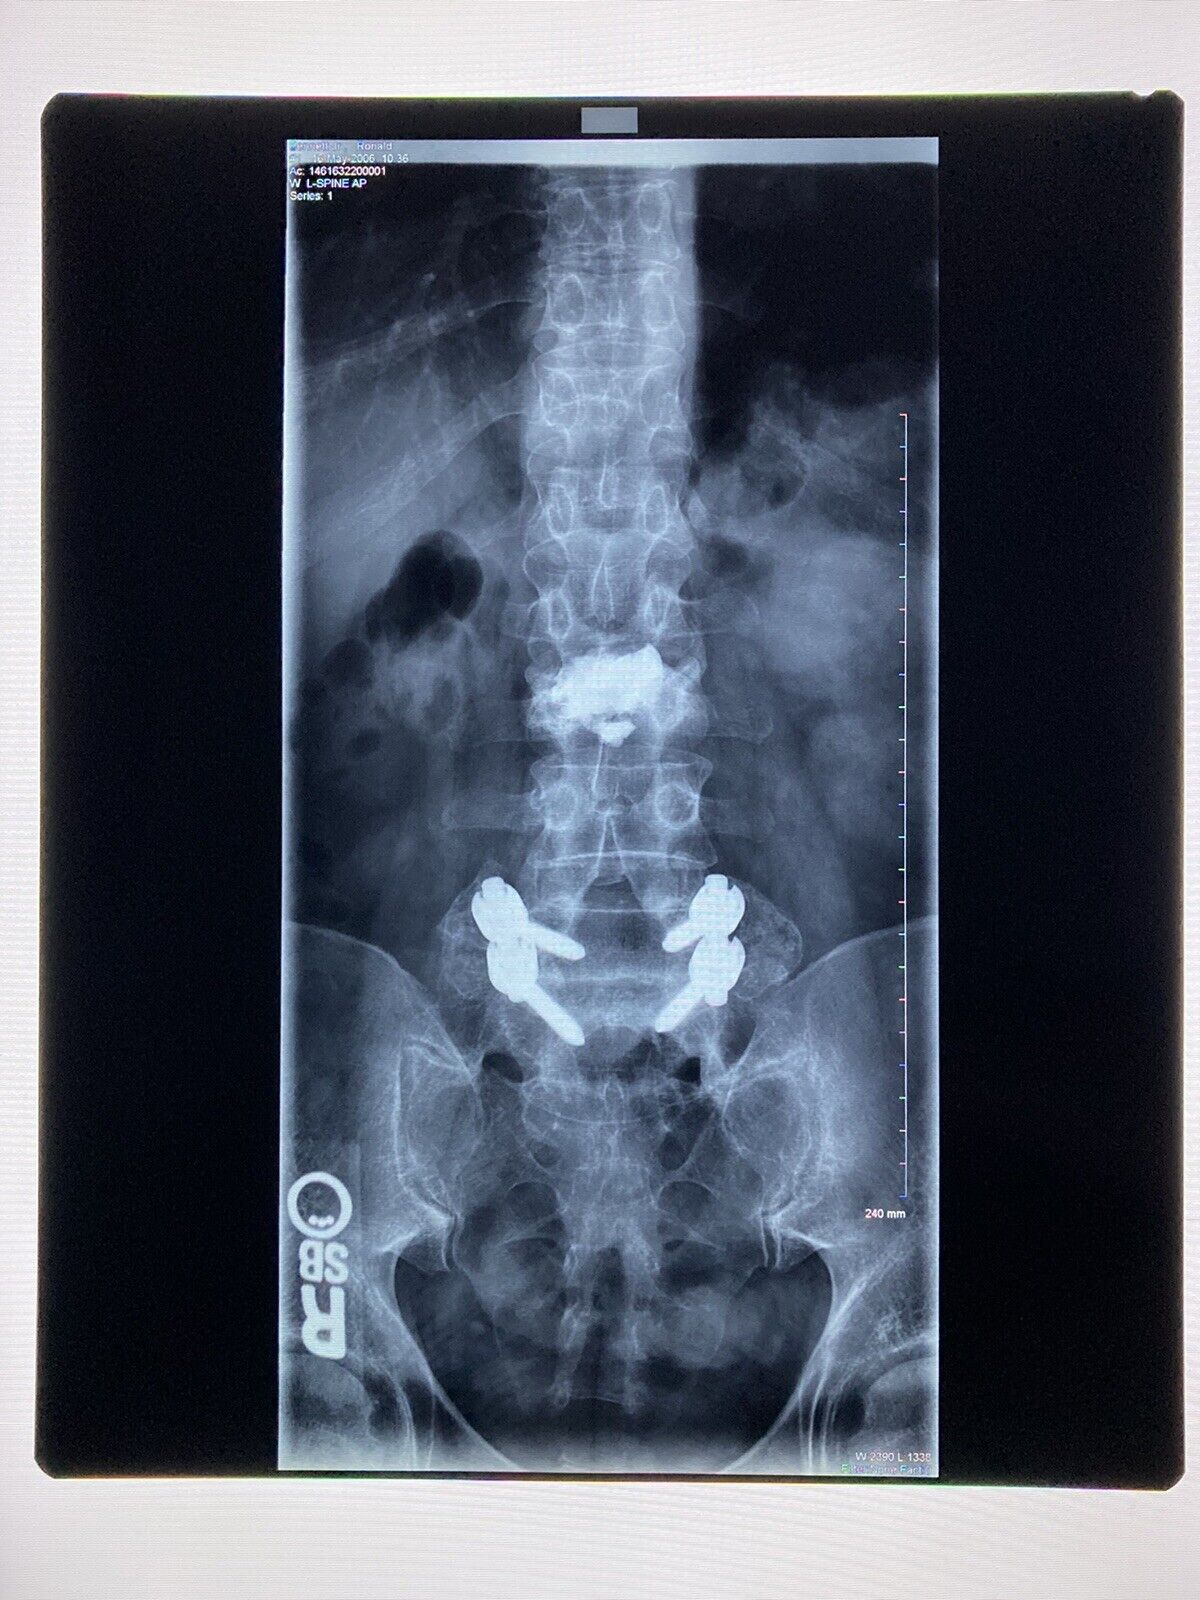 Xray film, x-ray, Used, Oddity, Medical, Surgical, Funeral - 14 x 17 MRI - SPINE